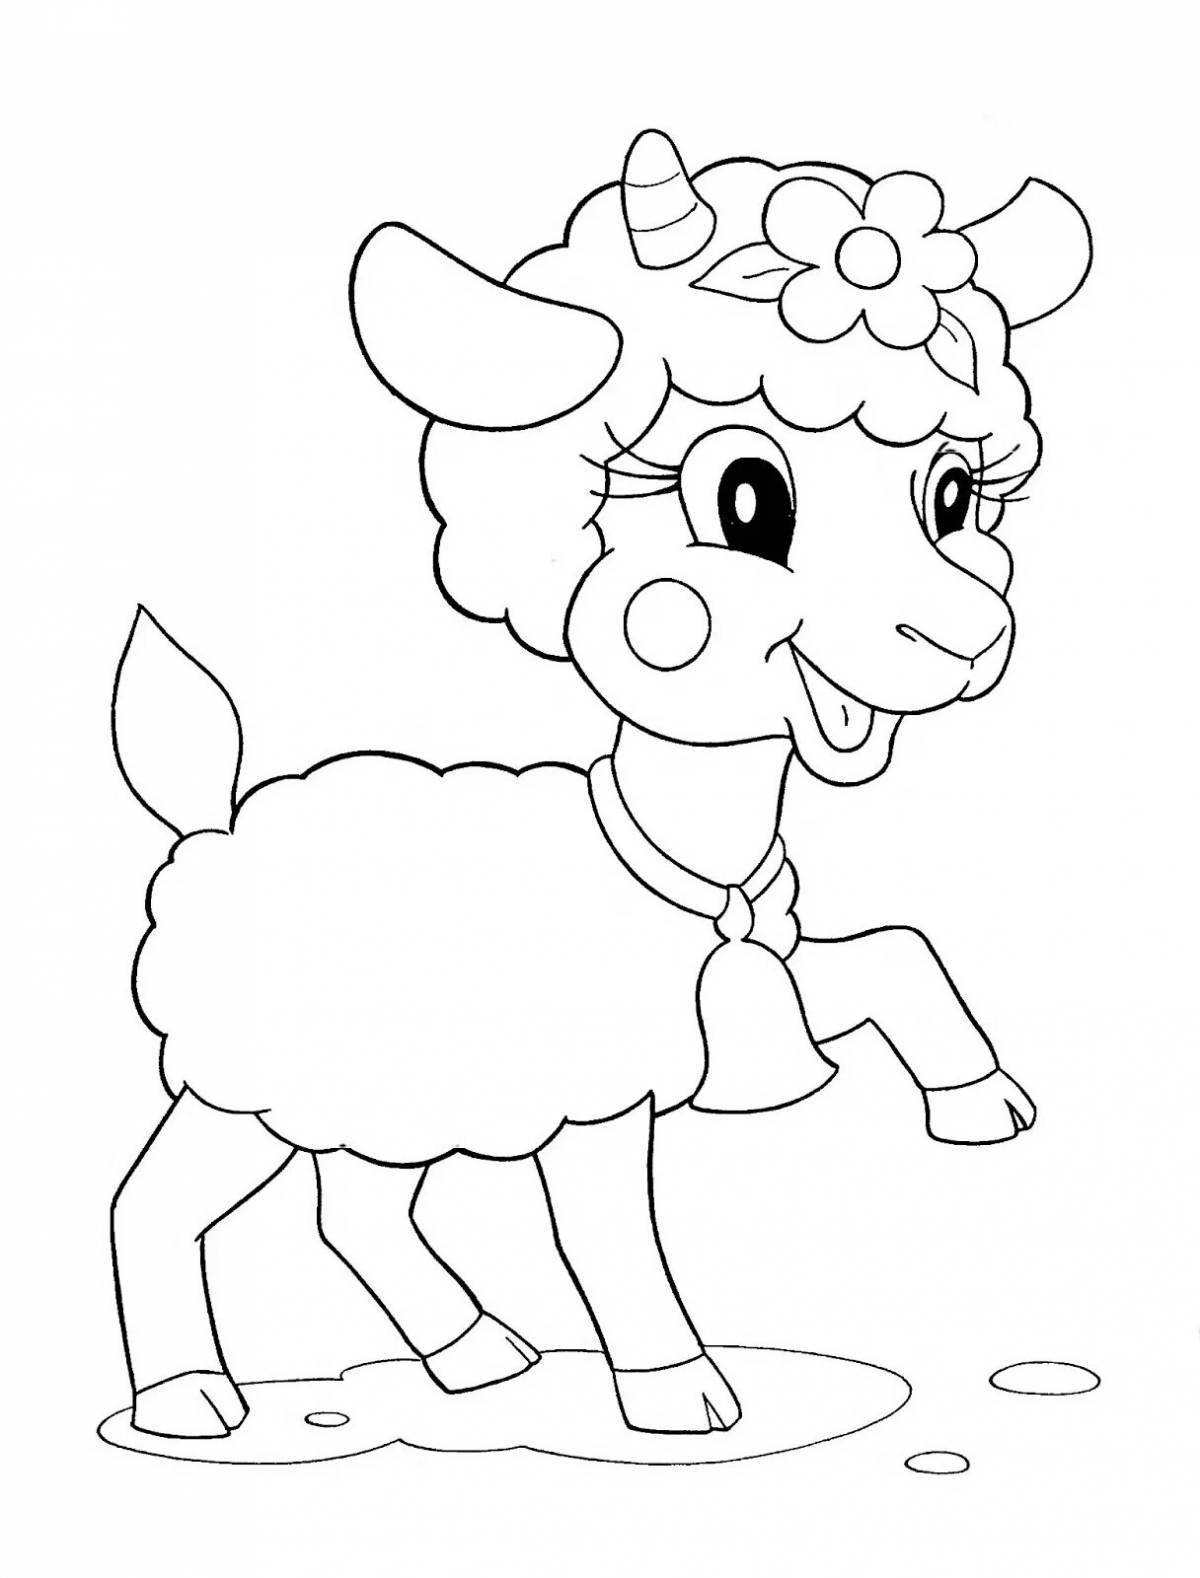 Sun goat coloring book for kids